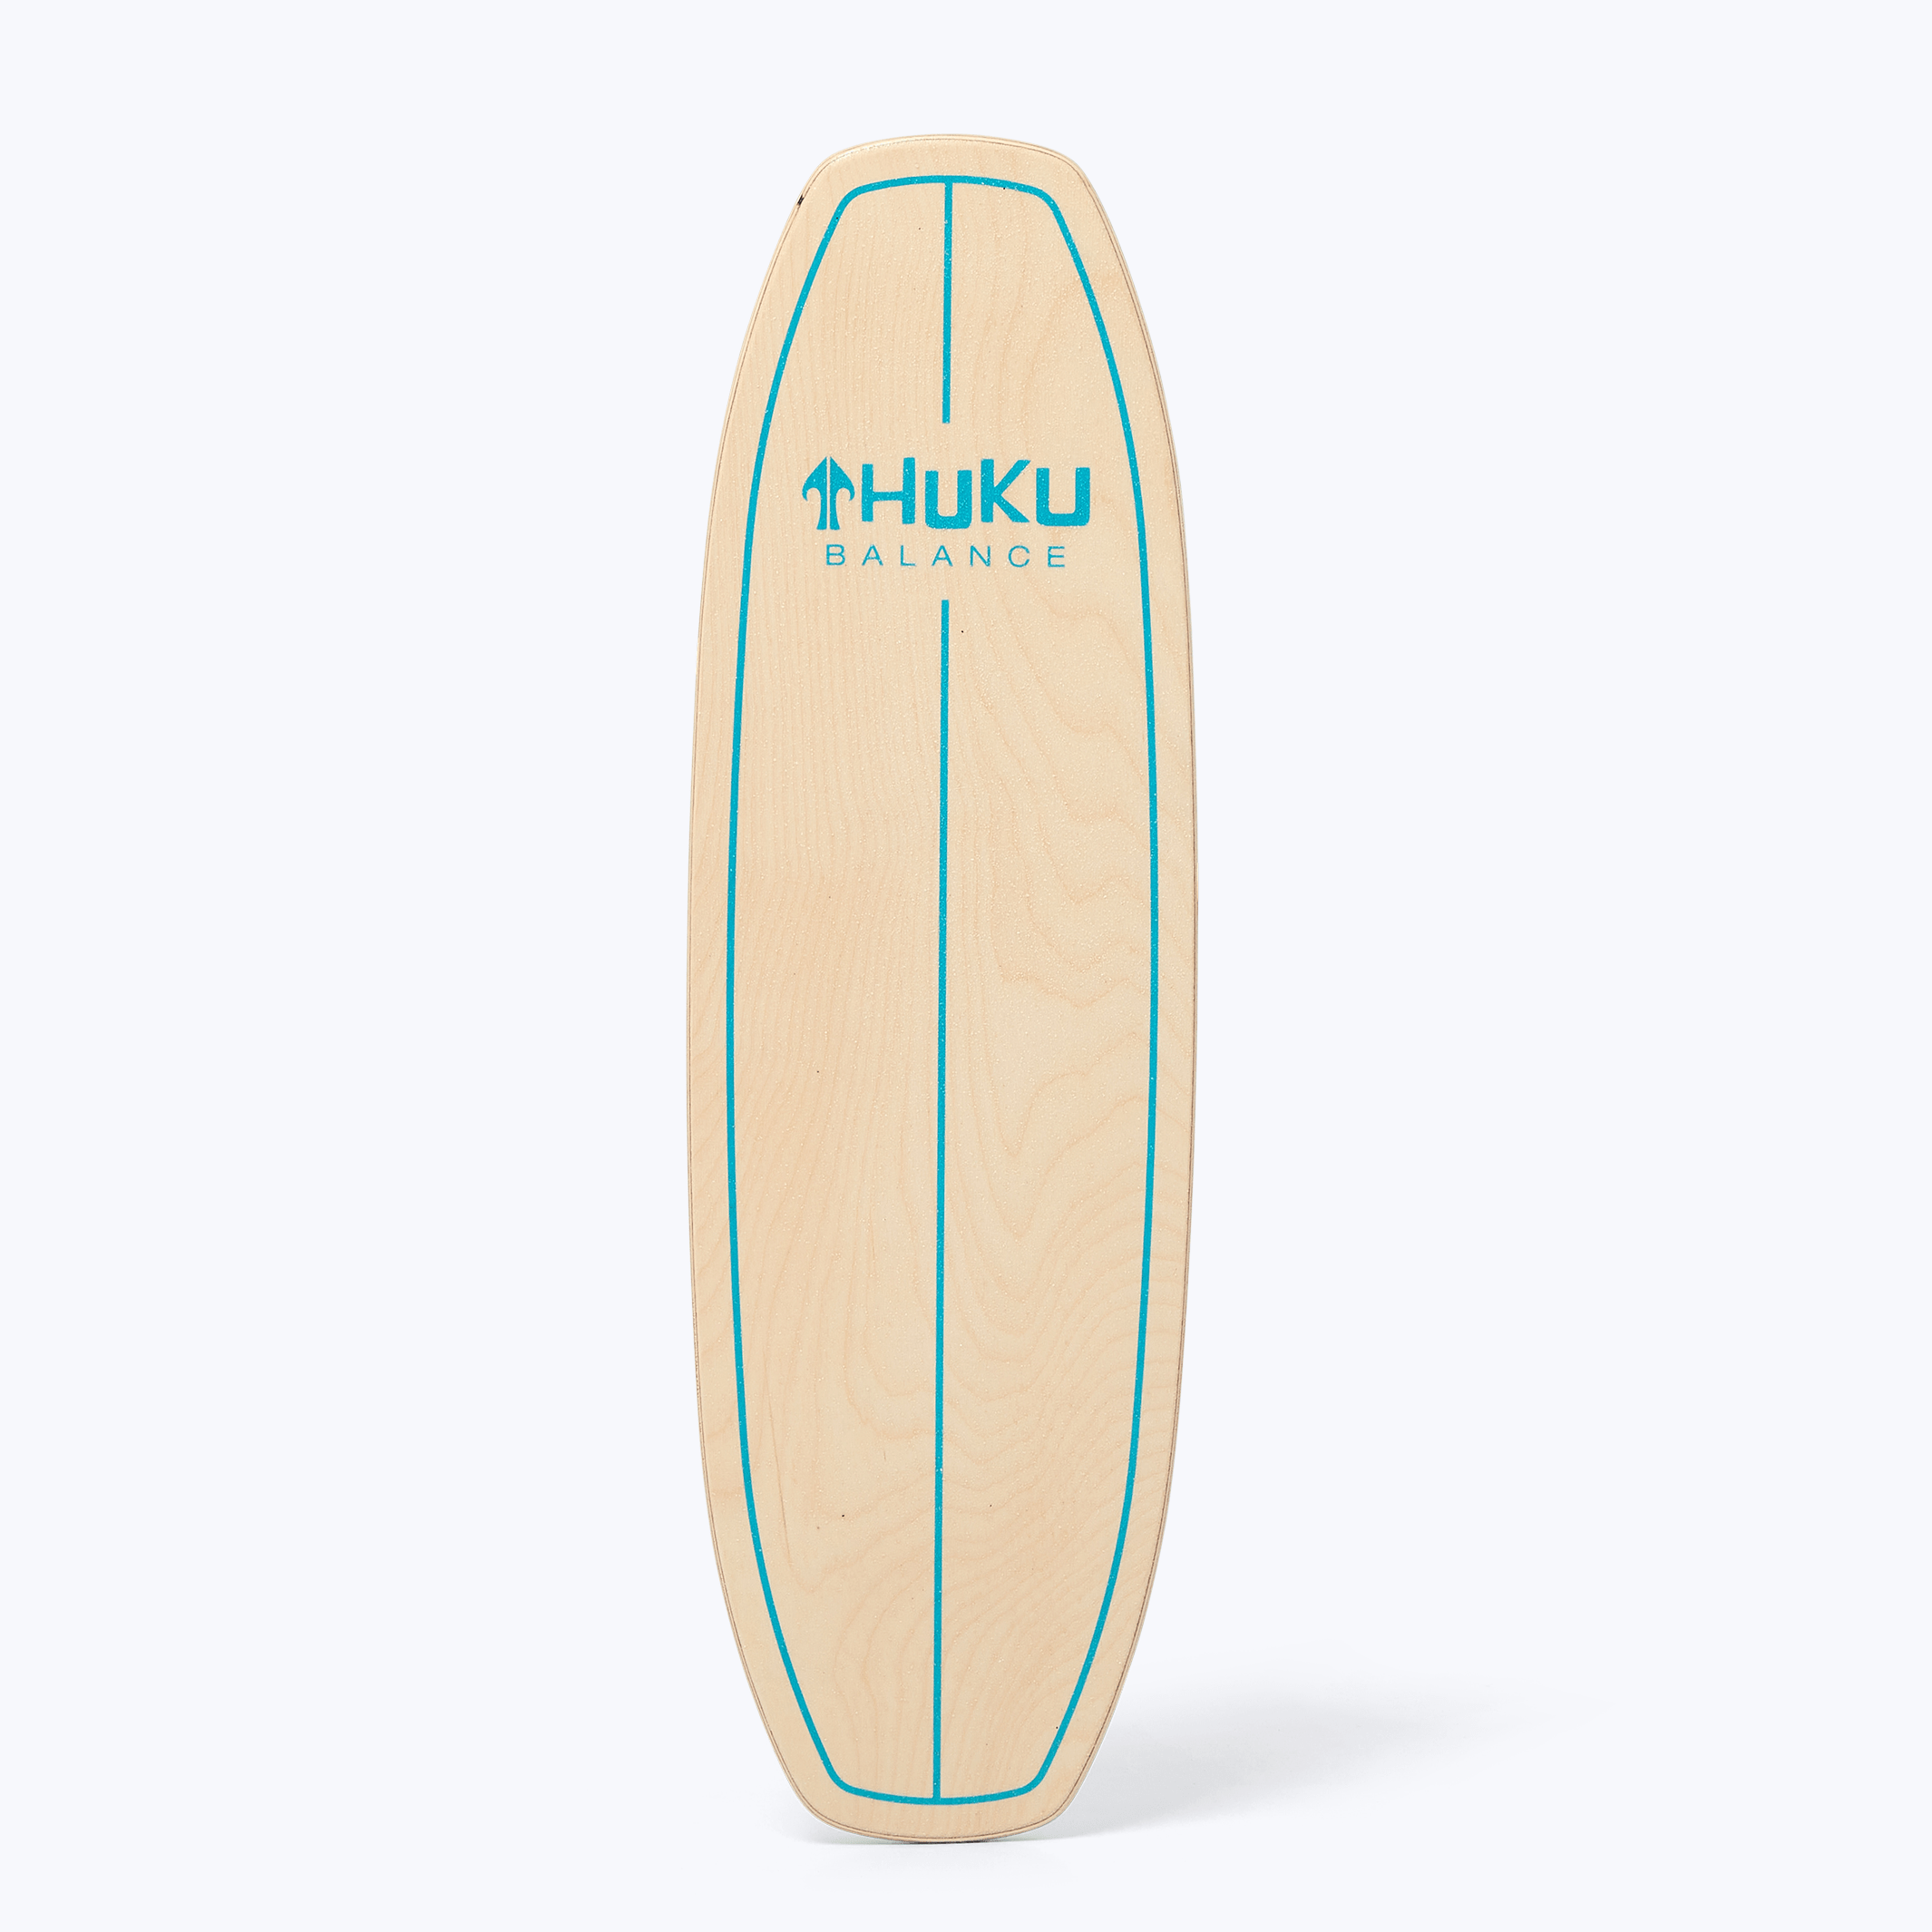 Huku Corefit Balance Board Deck. The narrower deck helps you focus on stability through training your core. Beginners.